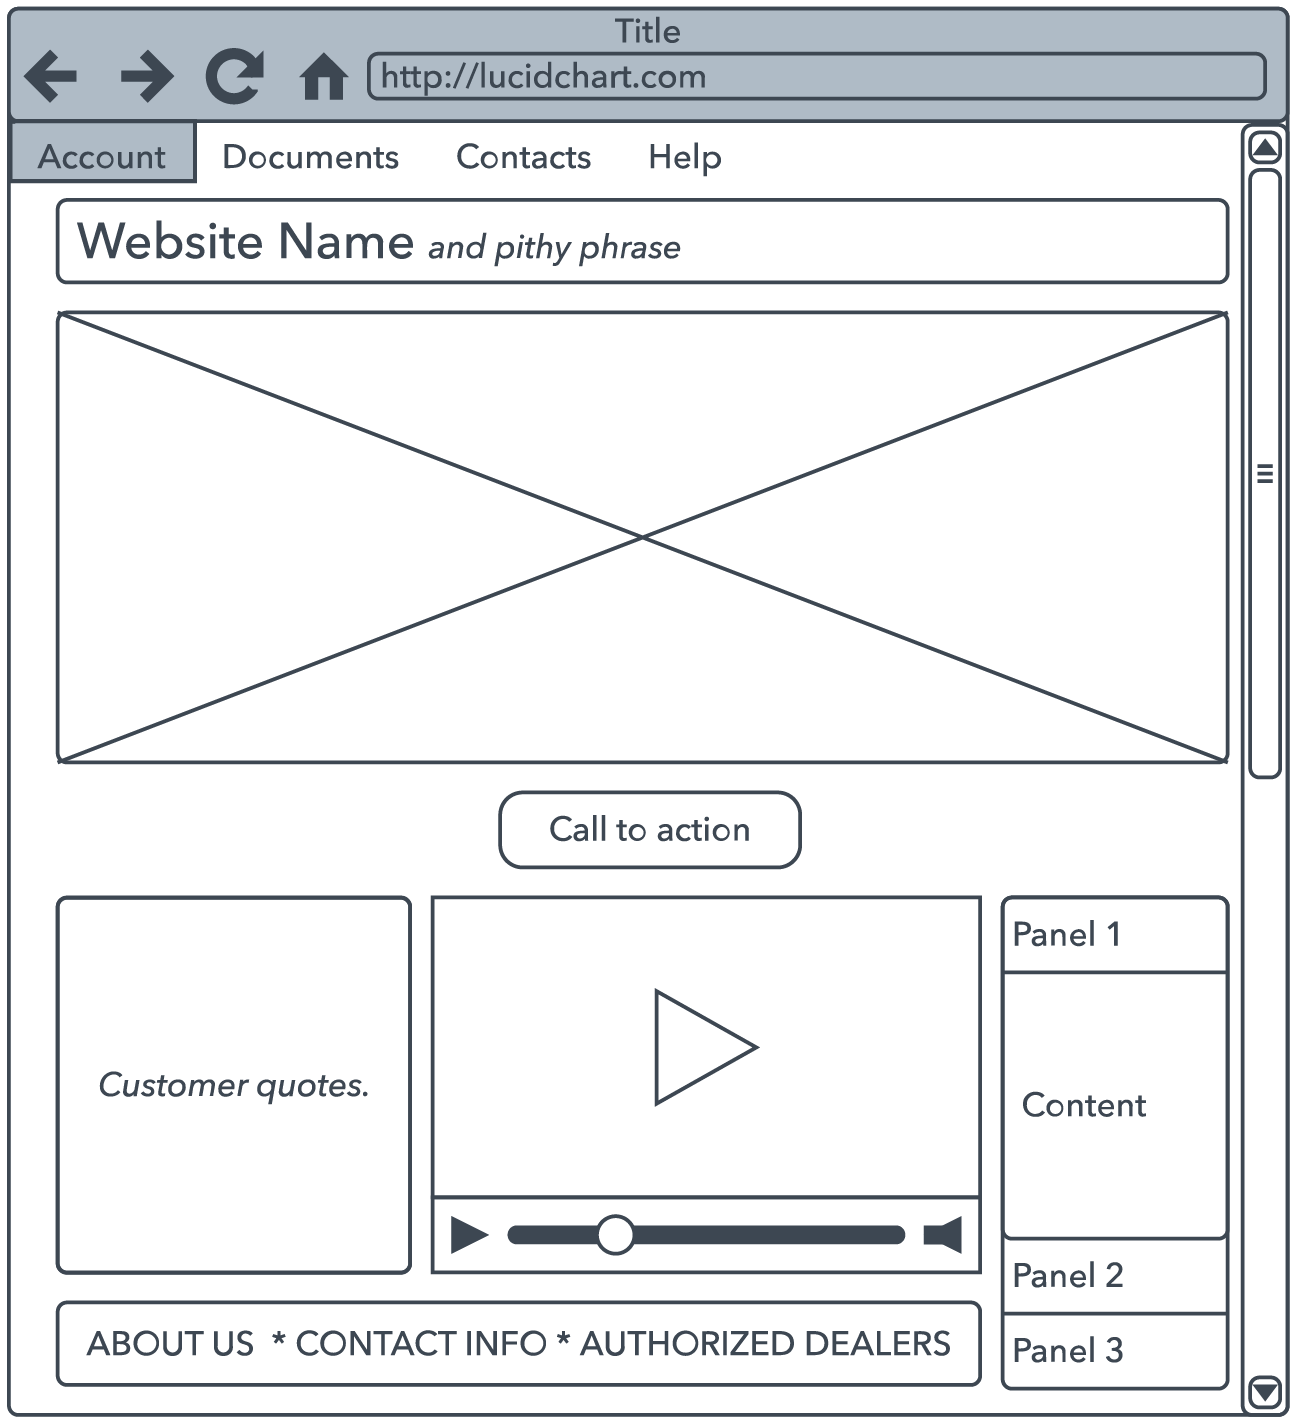 Wireframe from the Lucidchart website